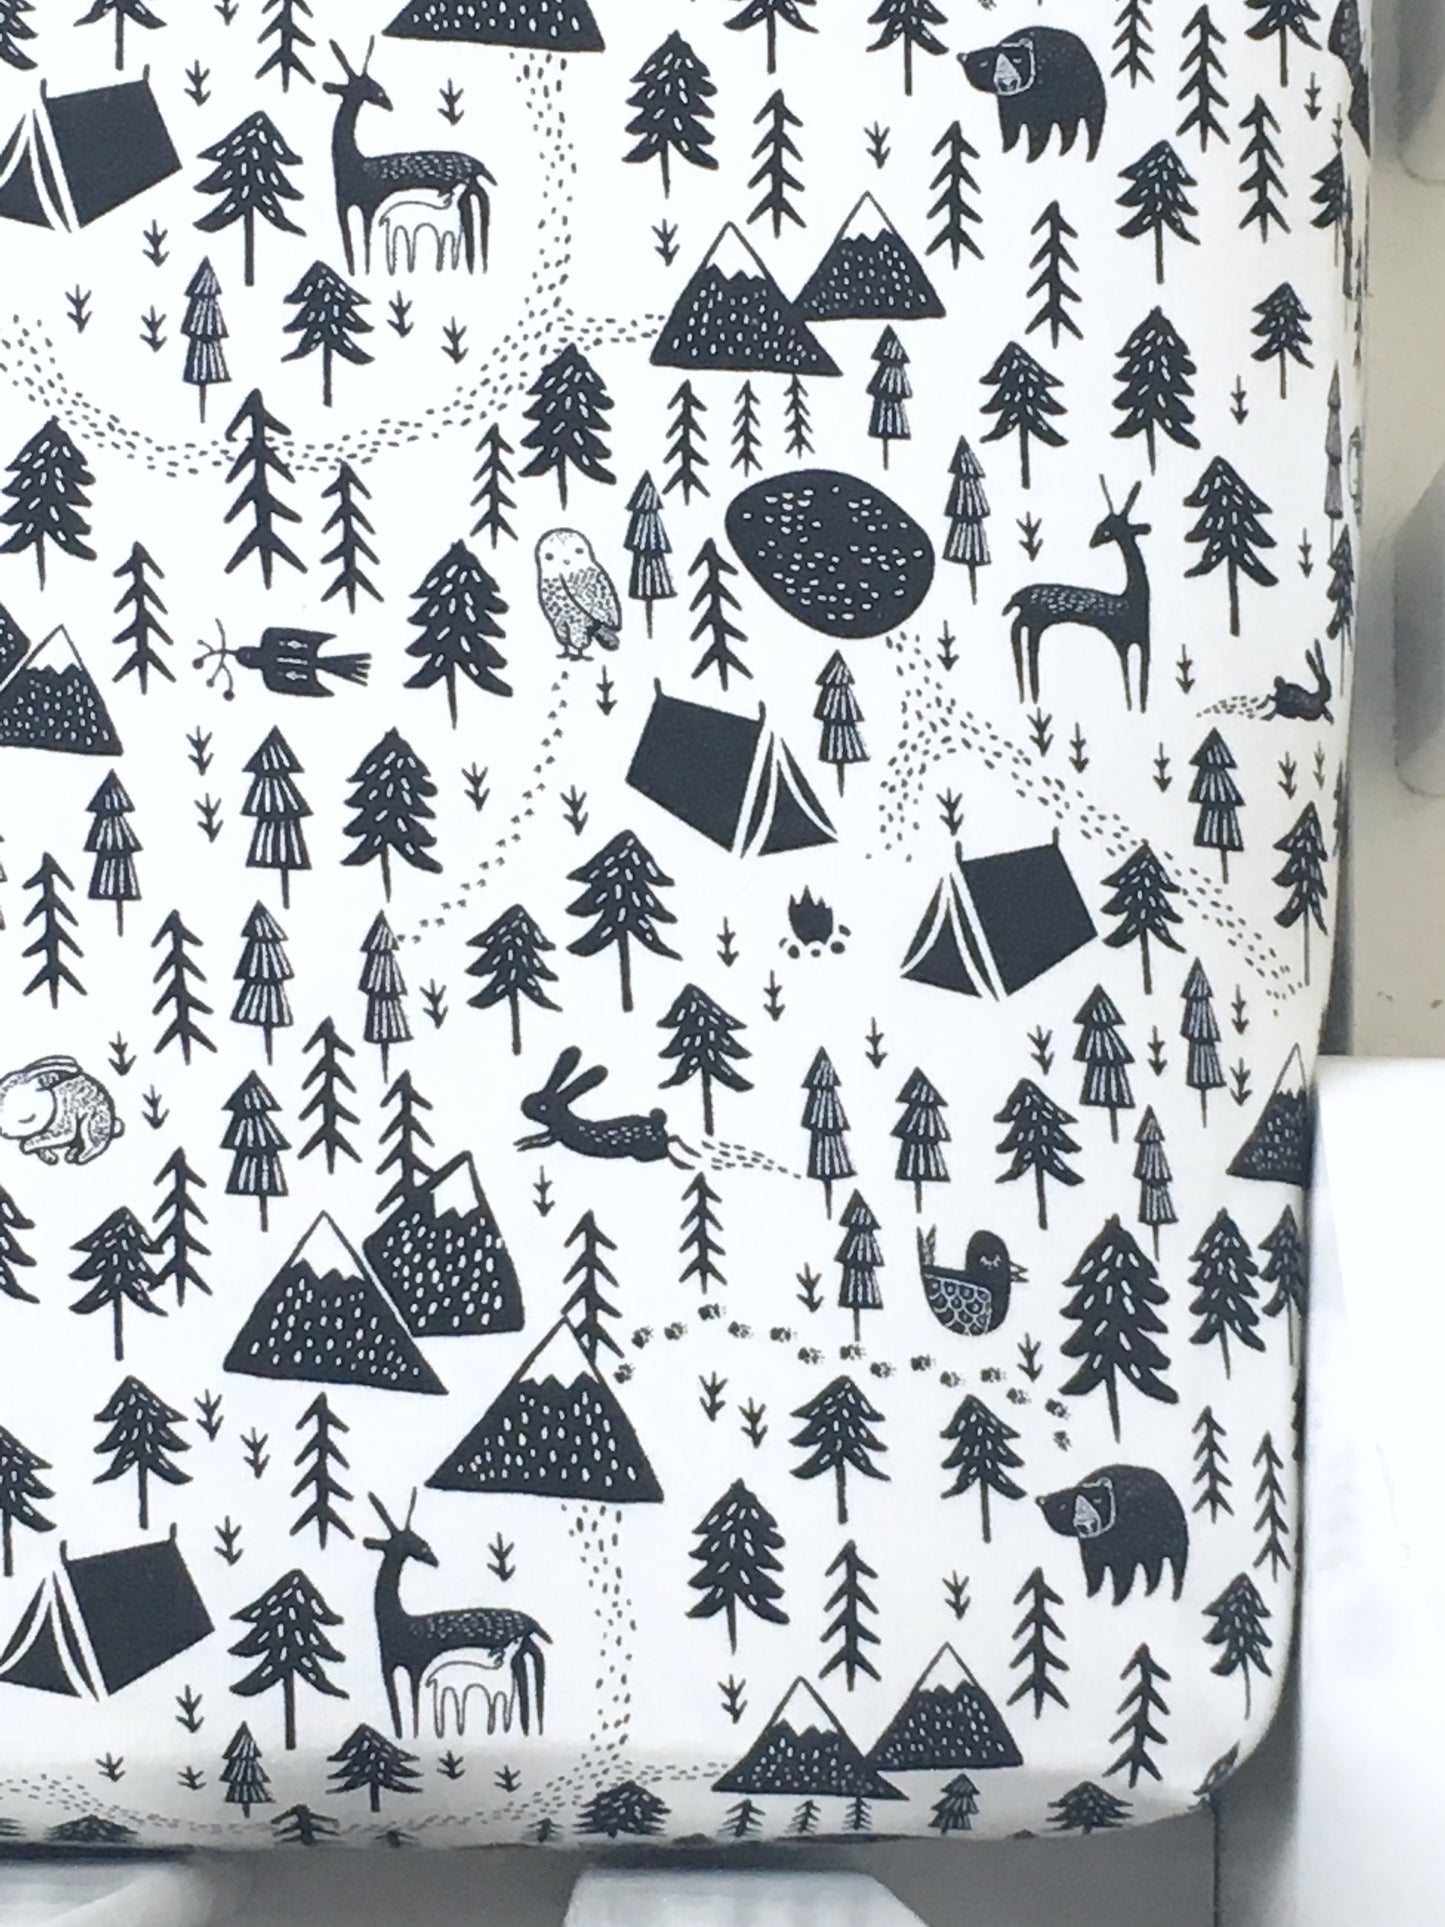 Camping Adventure Crib Sheet or Changing Pad Cover